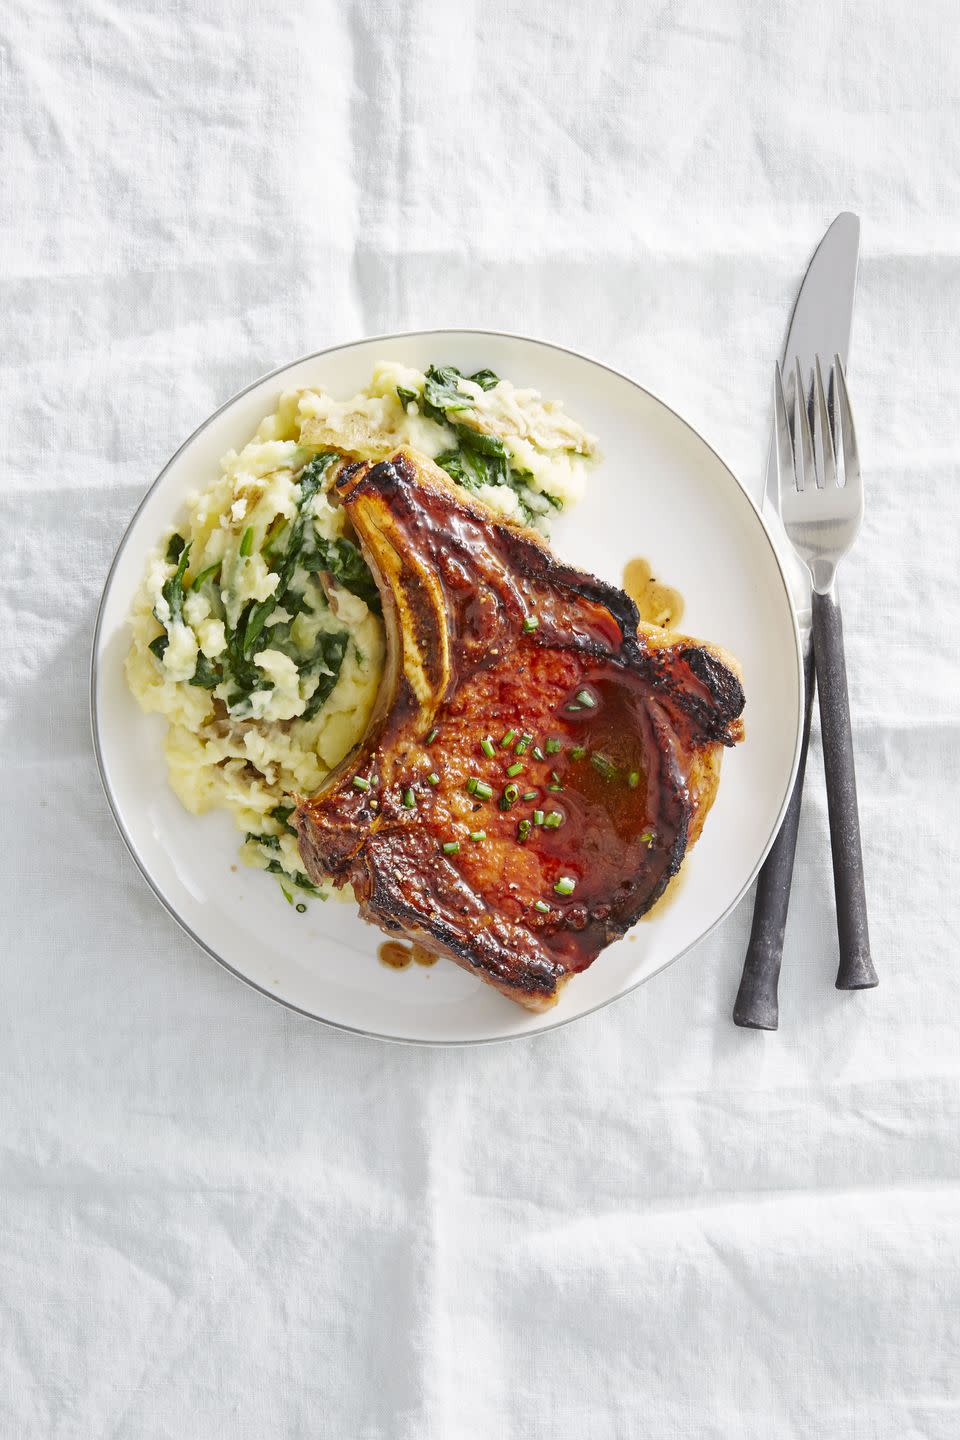 Balsamic-Glazed Pork Chops with Spinach Mashed Potatoes